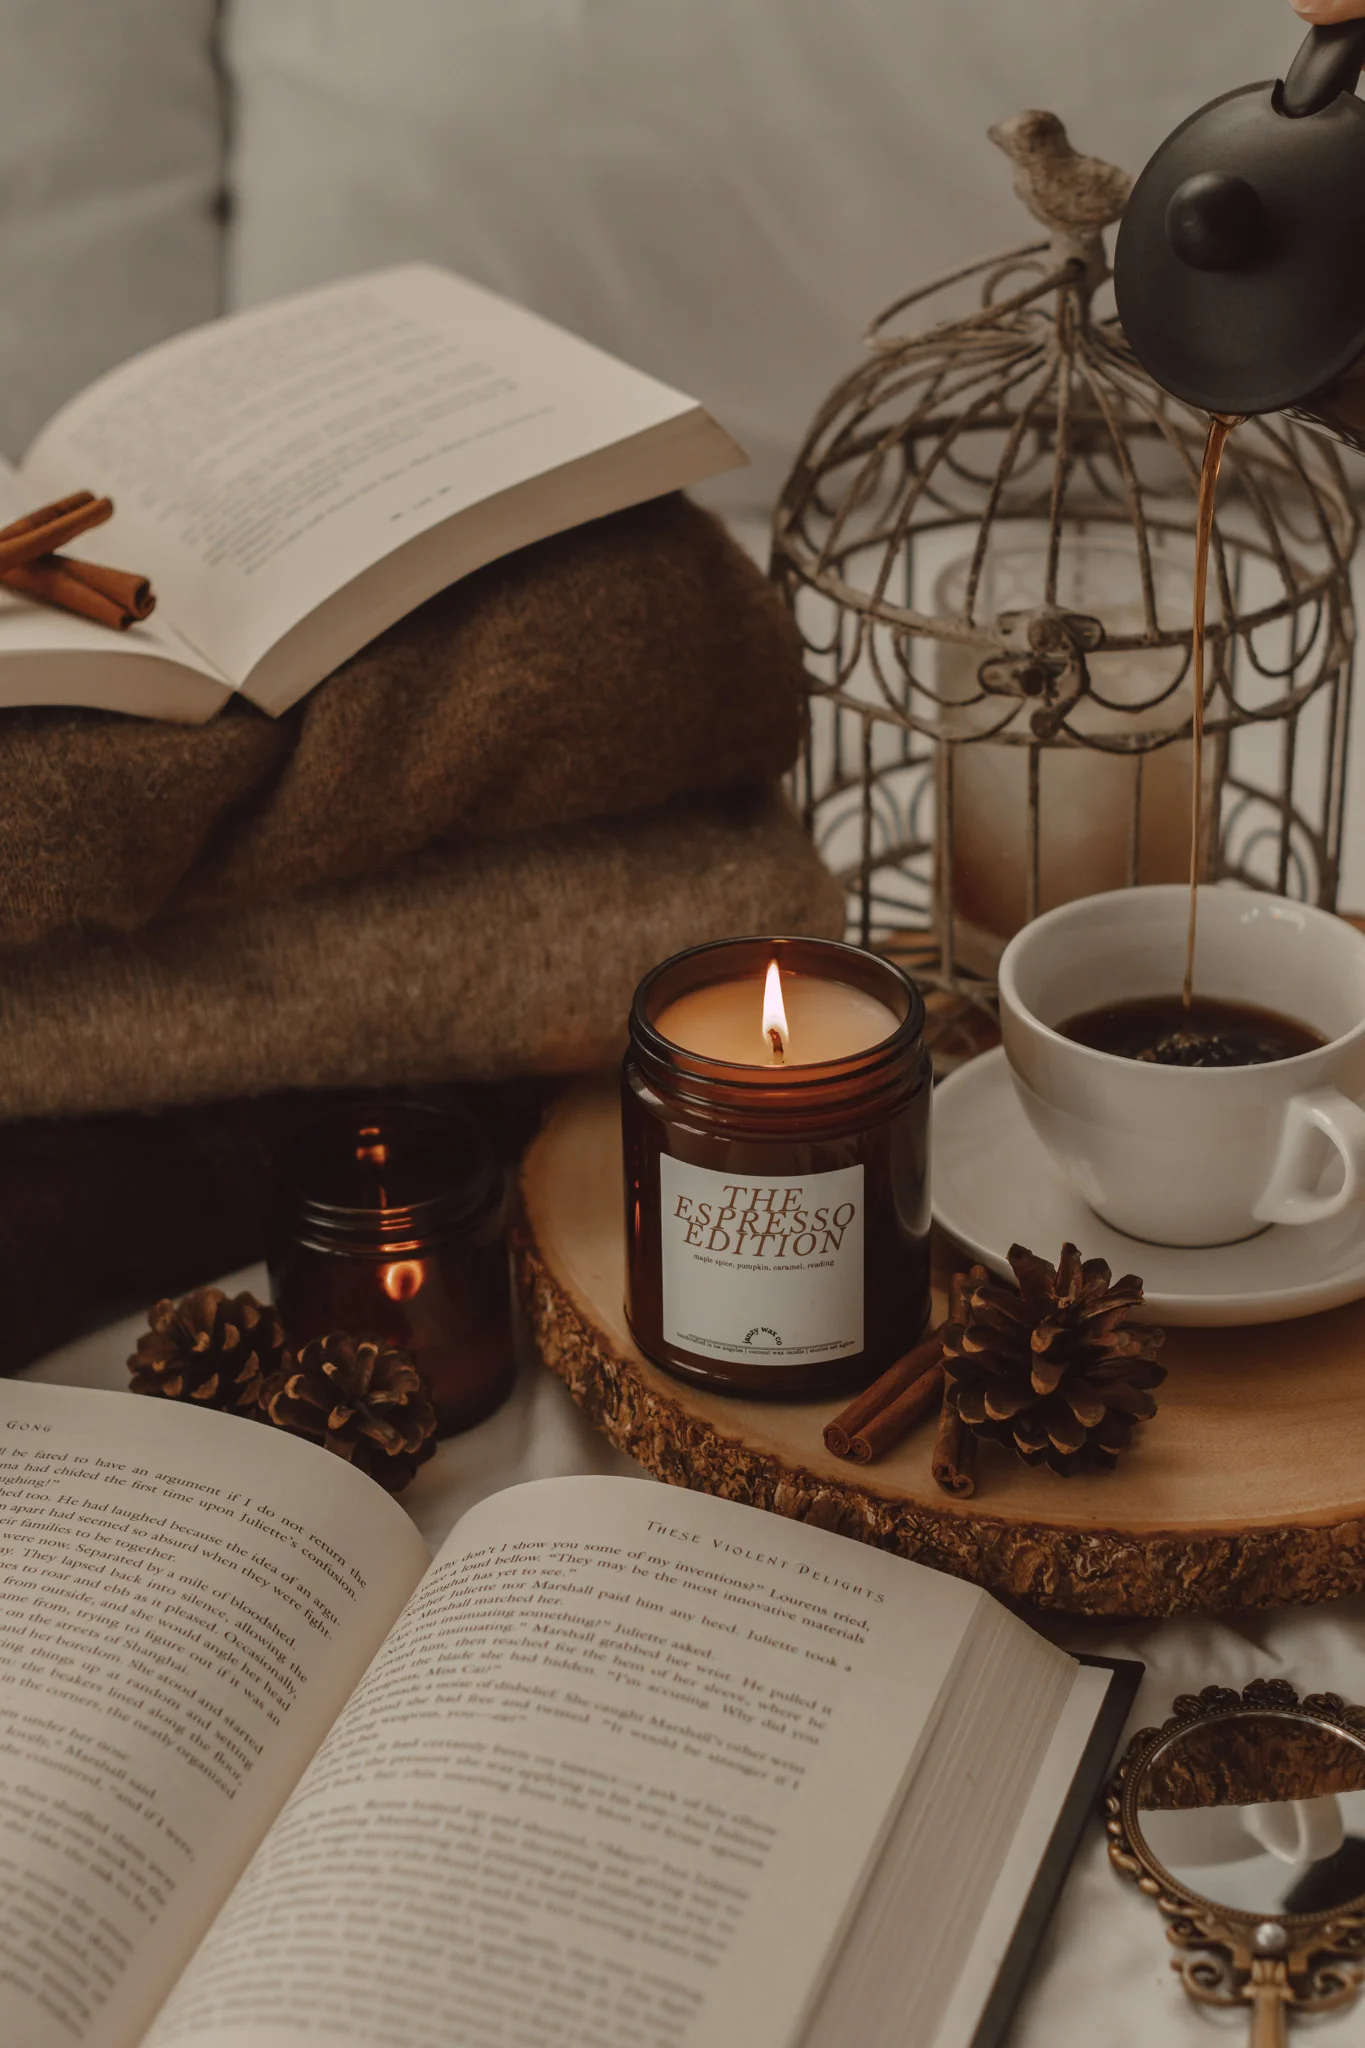 February 2024 New Book Releases by The Espresso Edition cozy bookish blog